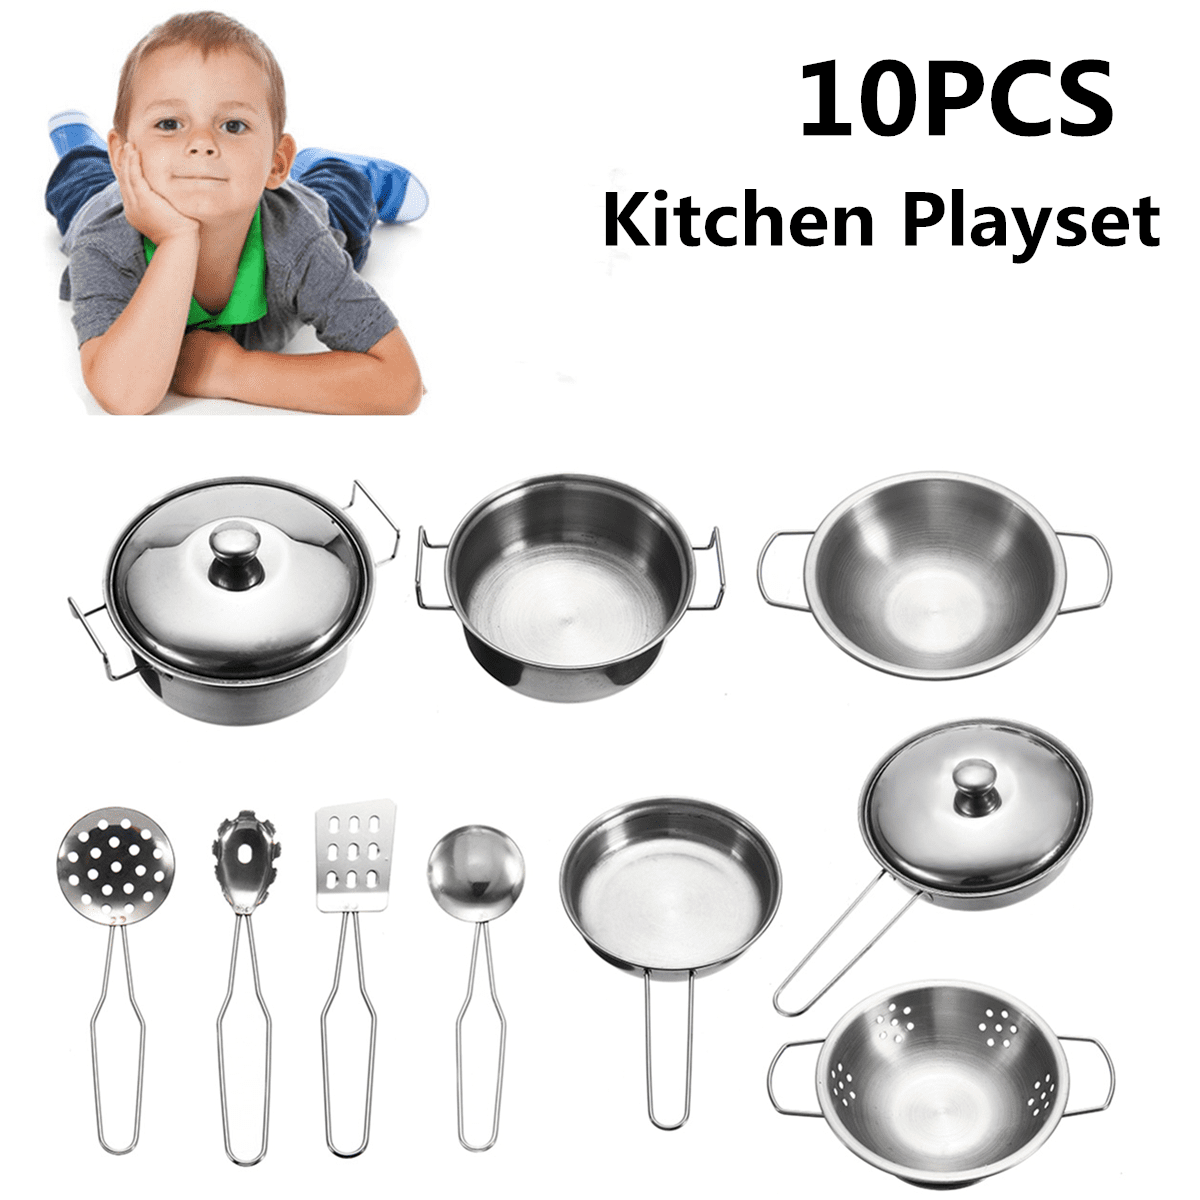 41Pcs Kitchen Pretend Toys Stainless Steel Cookware Playset Pretend Play USA 